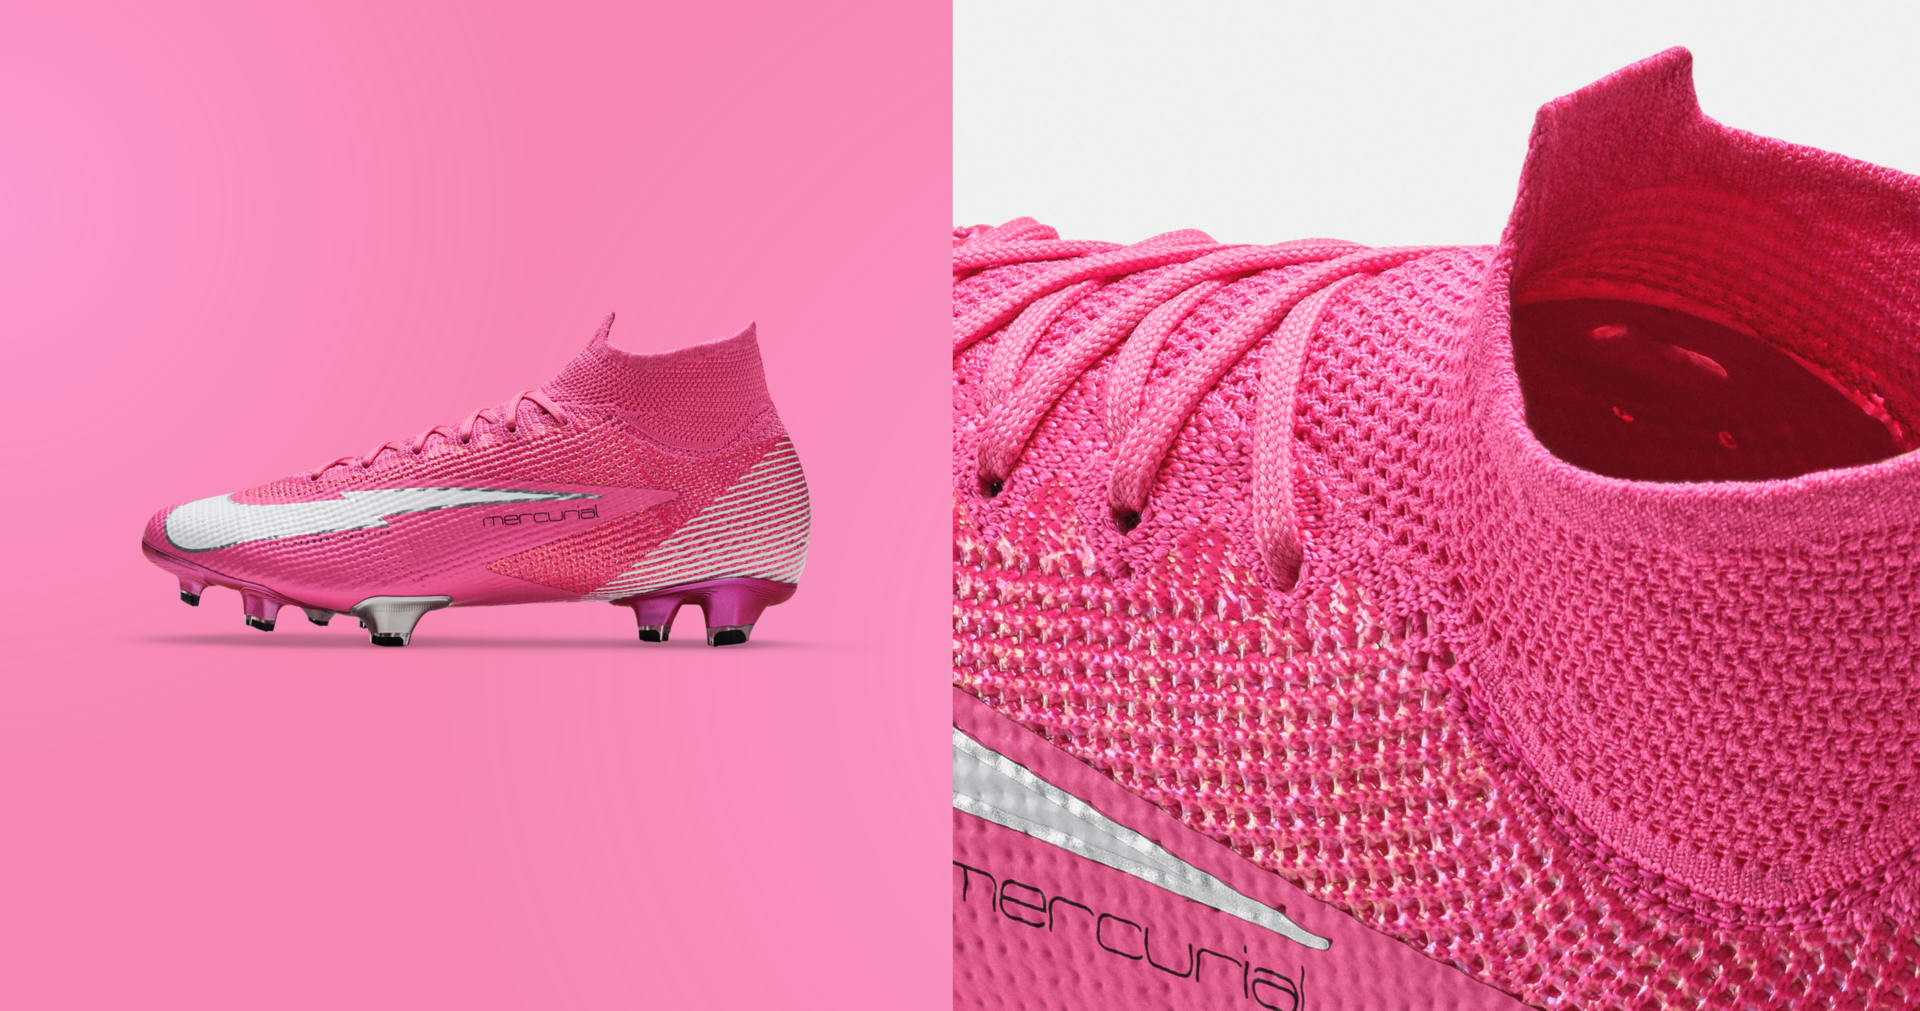 nike mercurial superfly cleats